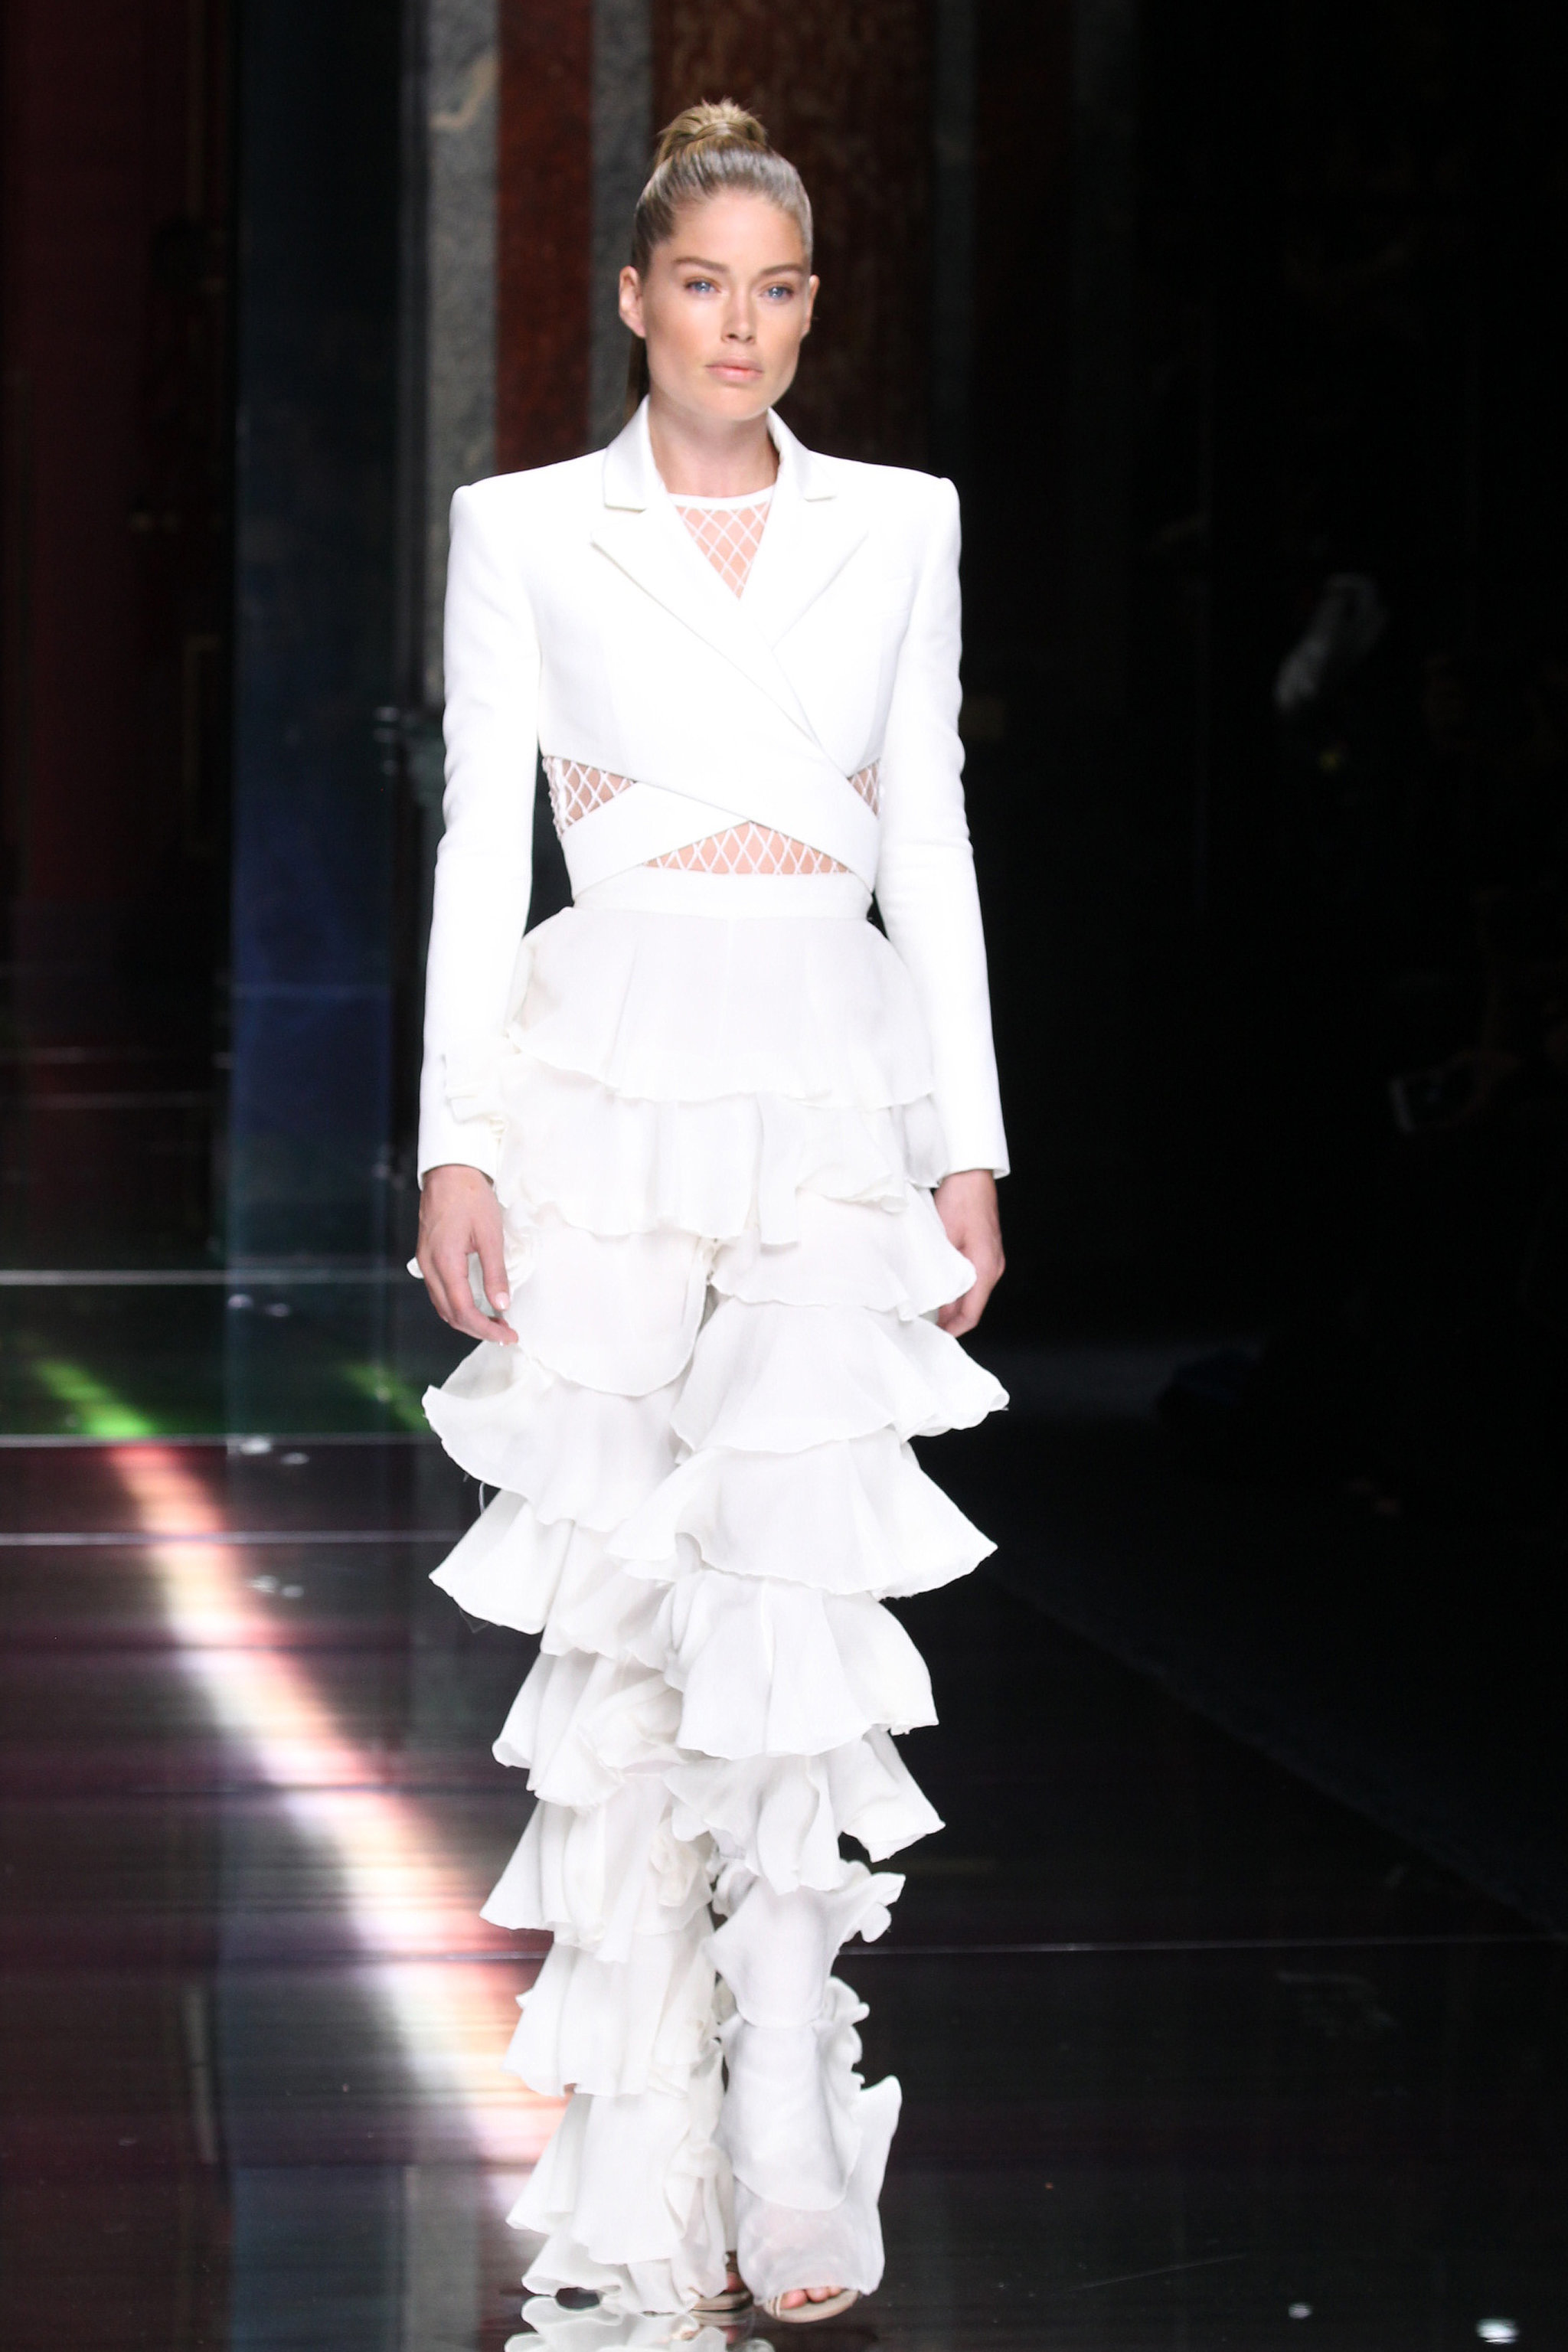 Doutzen Kroes closed the show in these white ruffled pants — a street ...